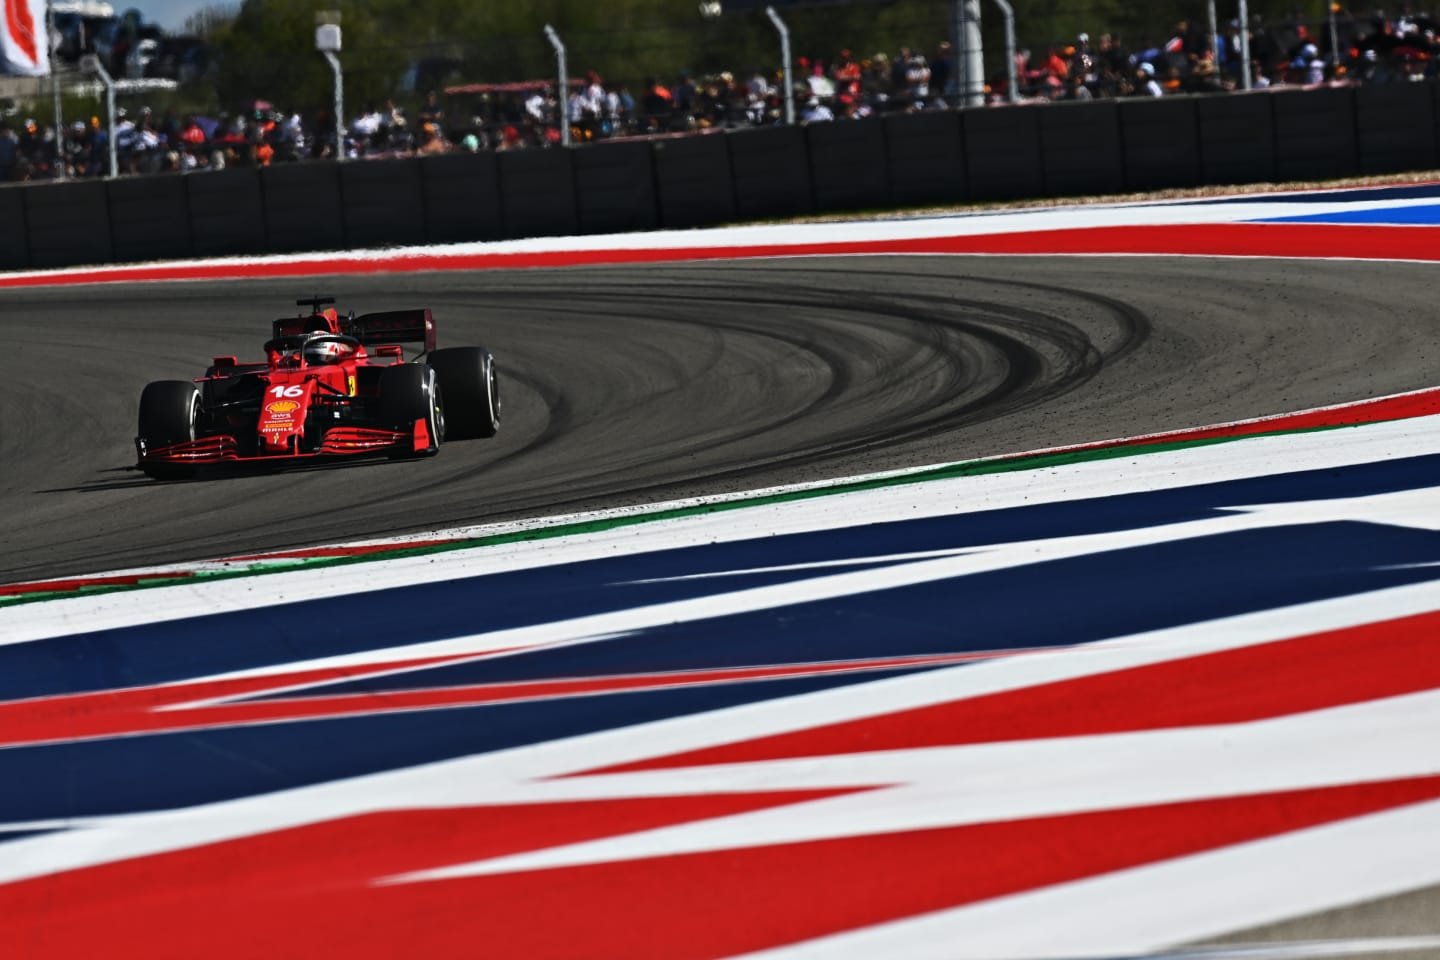 AUSTIN, TEXAS - OCTOBER 24: Charles Leclerc of Monaco driving the (16) Scuderia Ferrari SF21 during the F1 Grand Prix of USA at Circuit of The Americas on October 24, 2021 in Austin, Texas. (Photo by Clive Mason - Formula 1/Formula 1 via Getty Images)